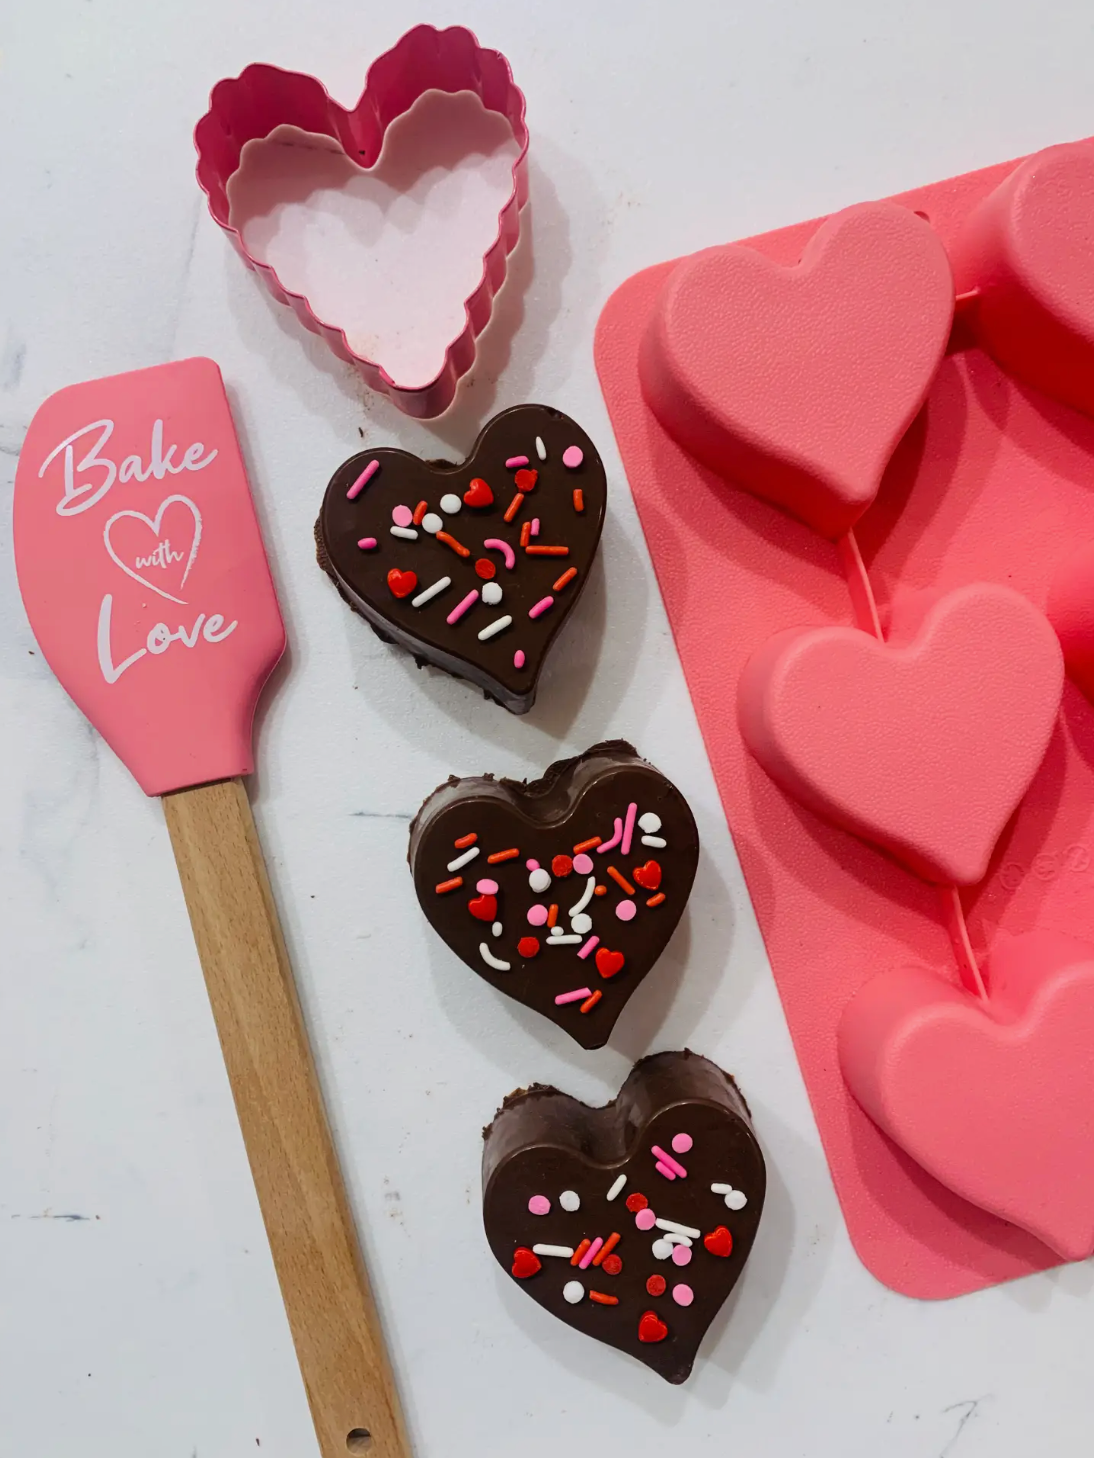 Bake With Love Spatula & Heart Cookie Cutter